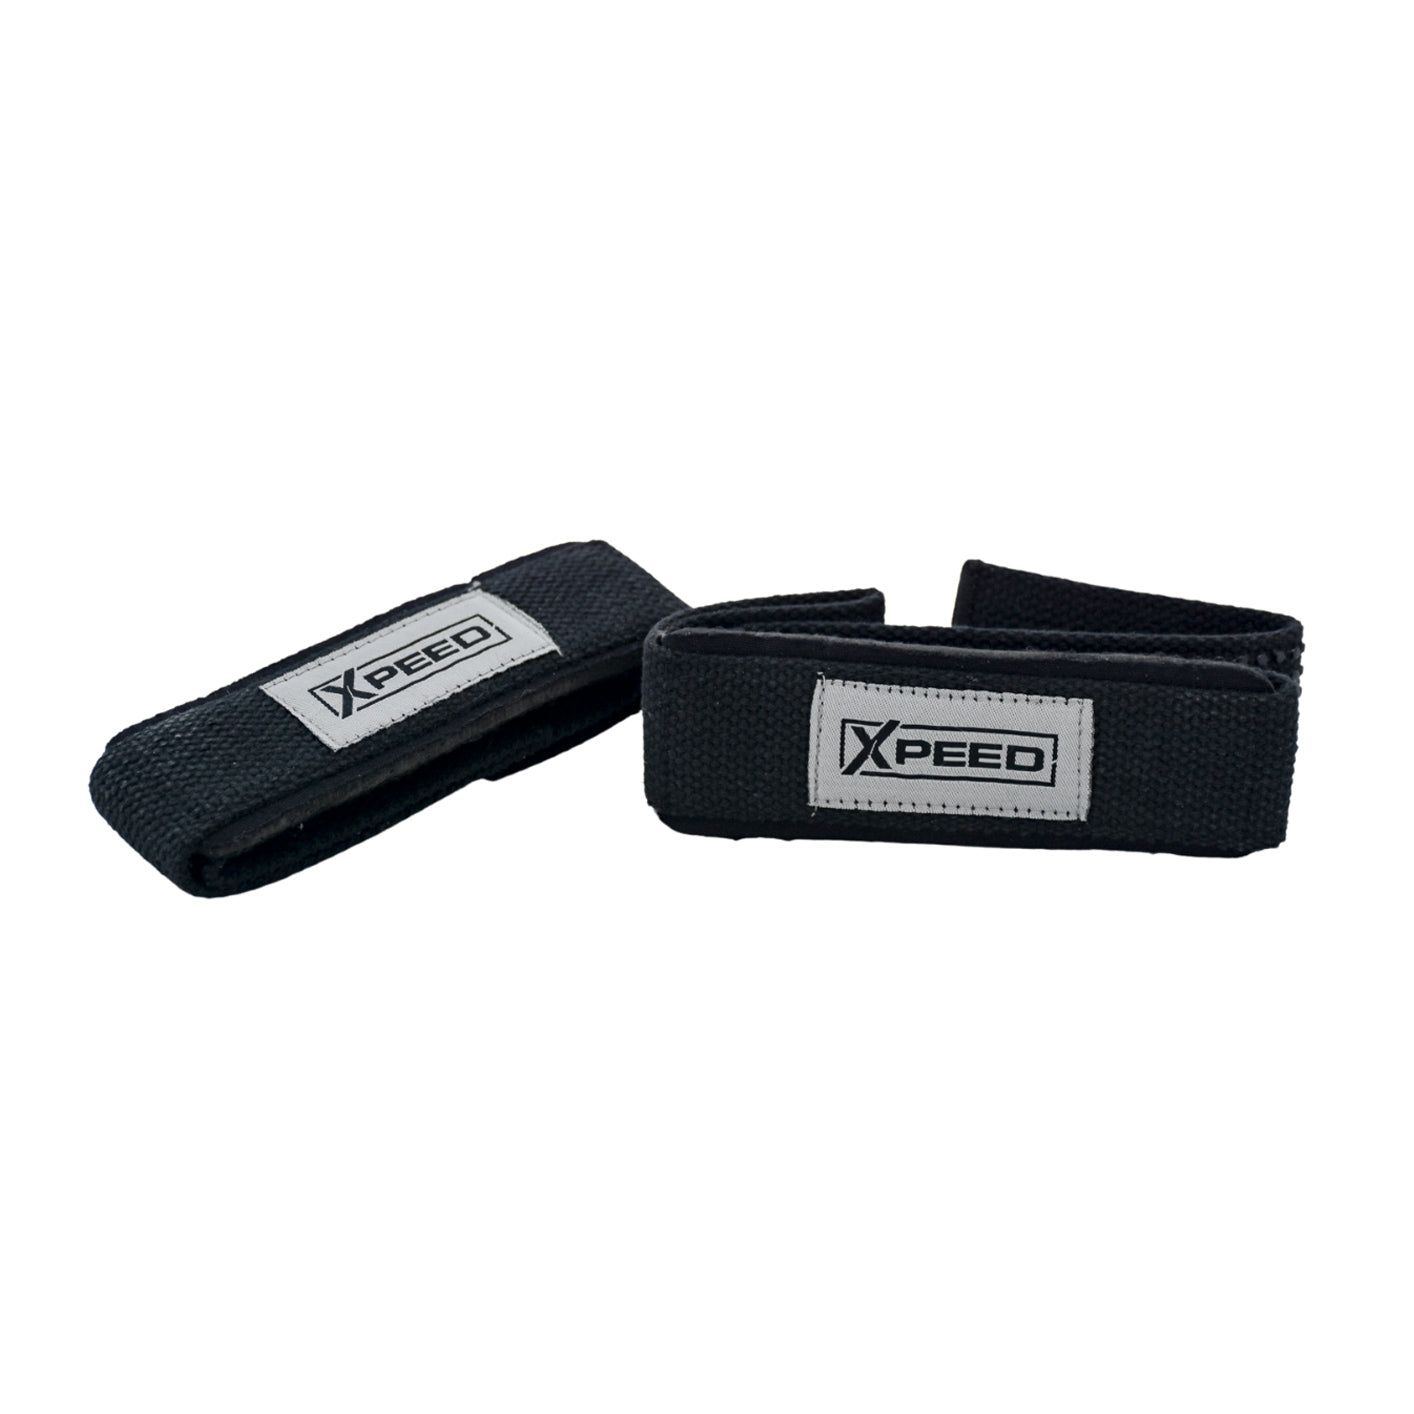 Xpeed Eye In Tail Lifting Straps